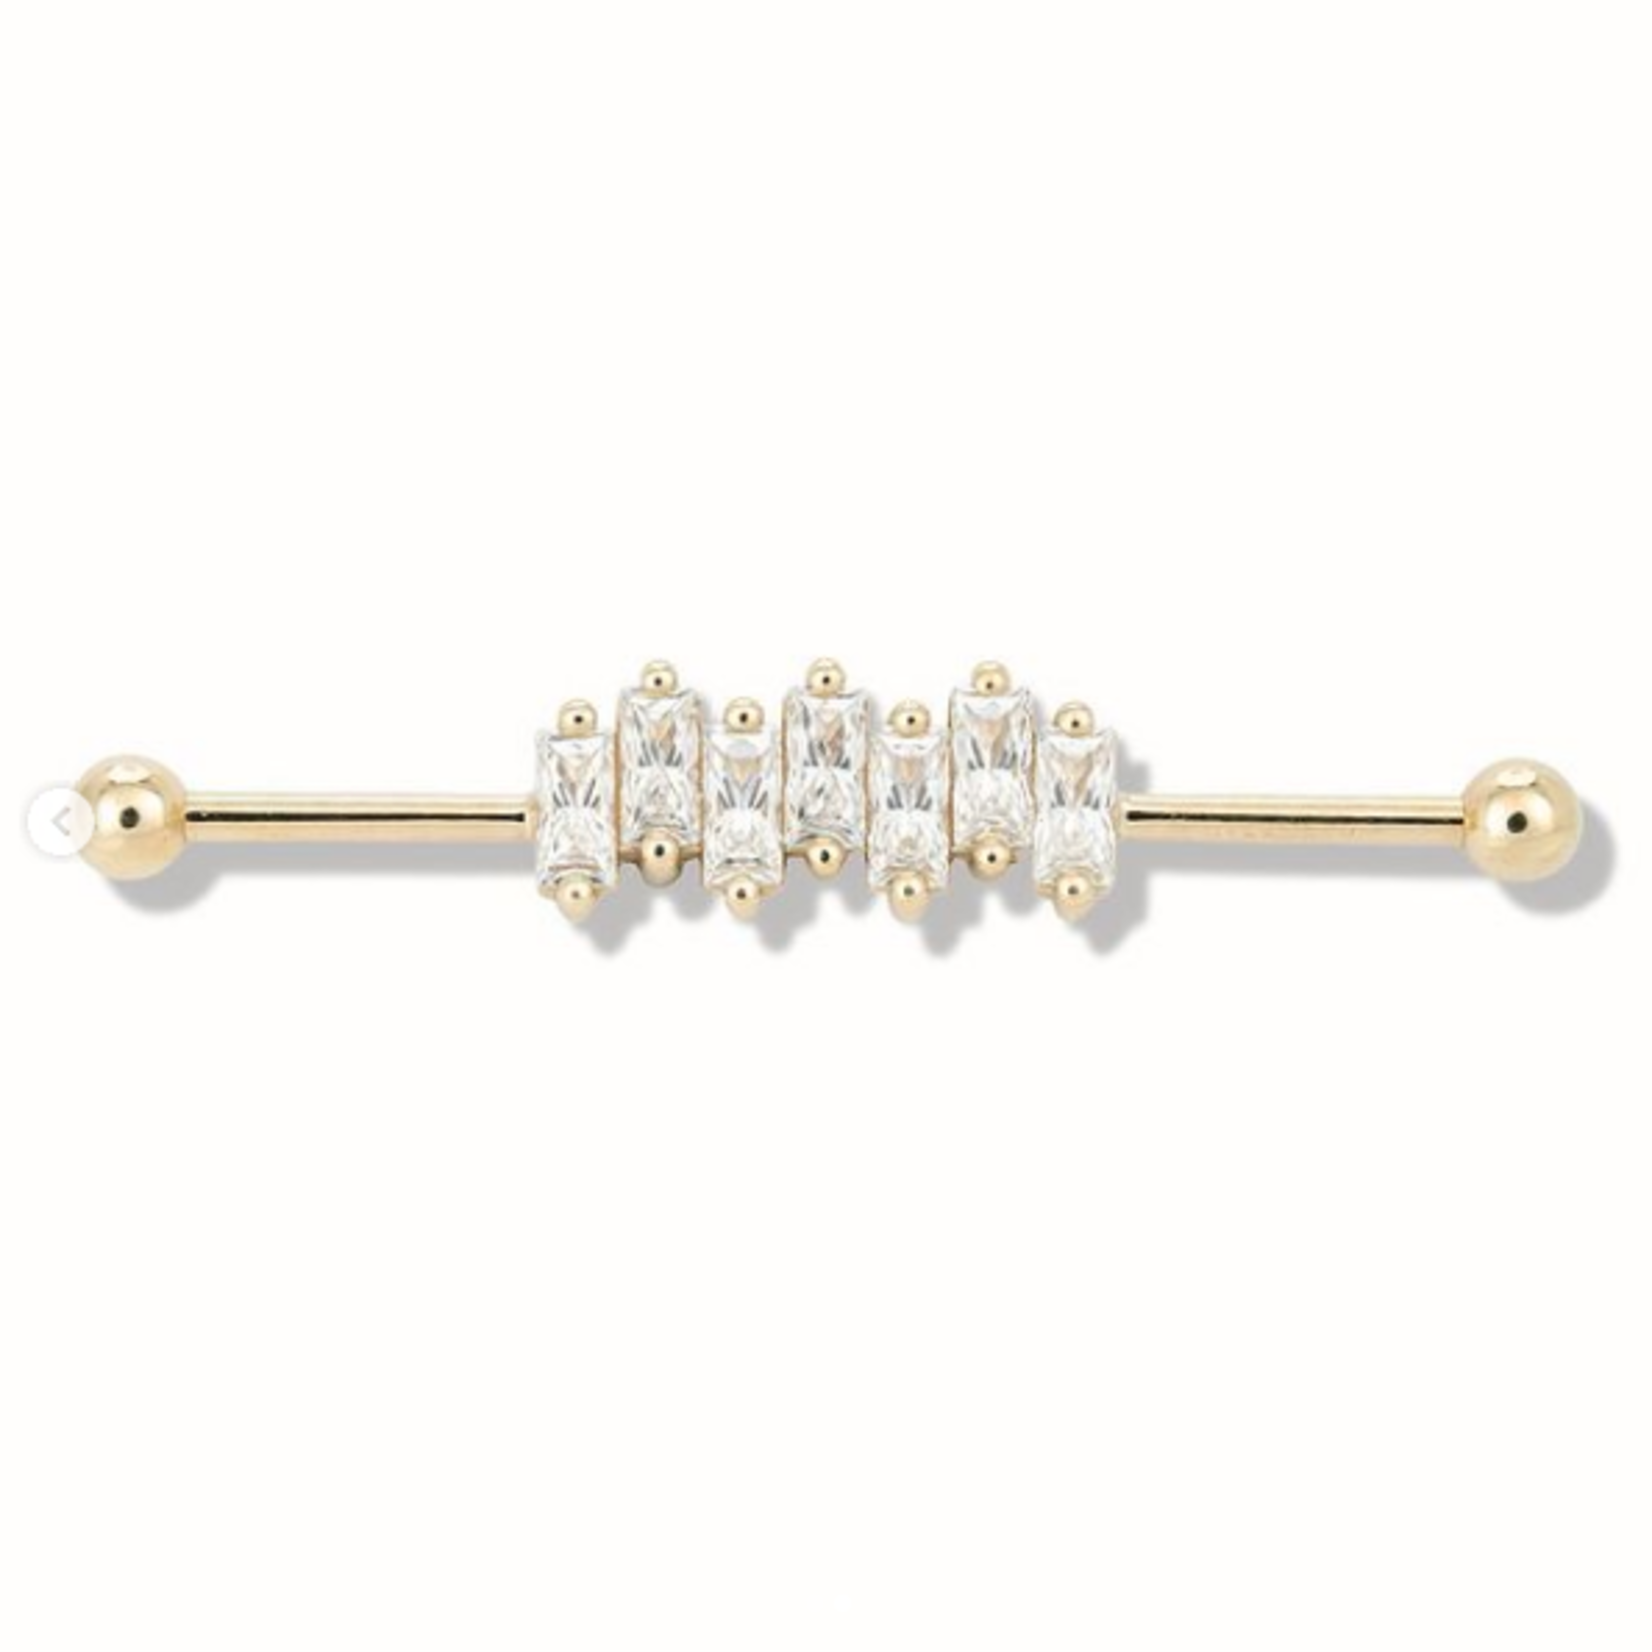 BVLA BVLA 16g "Madison" industrial barbell with CZ